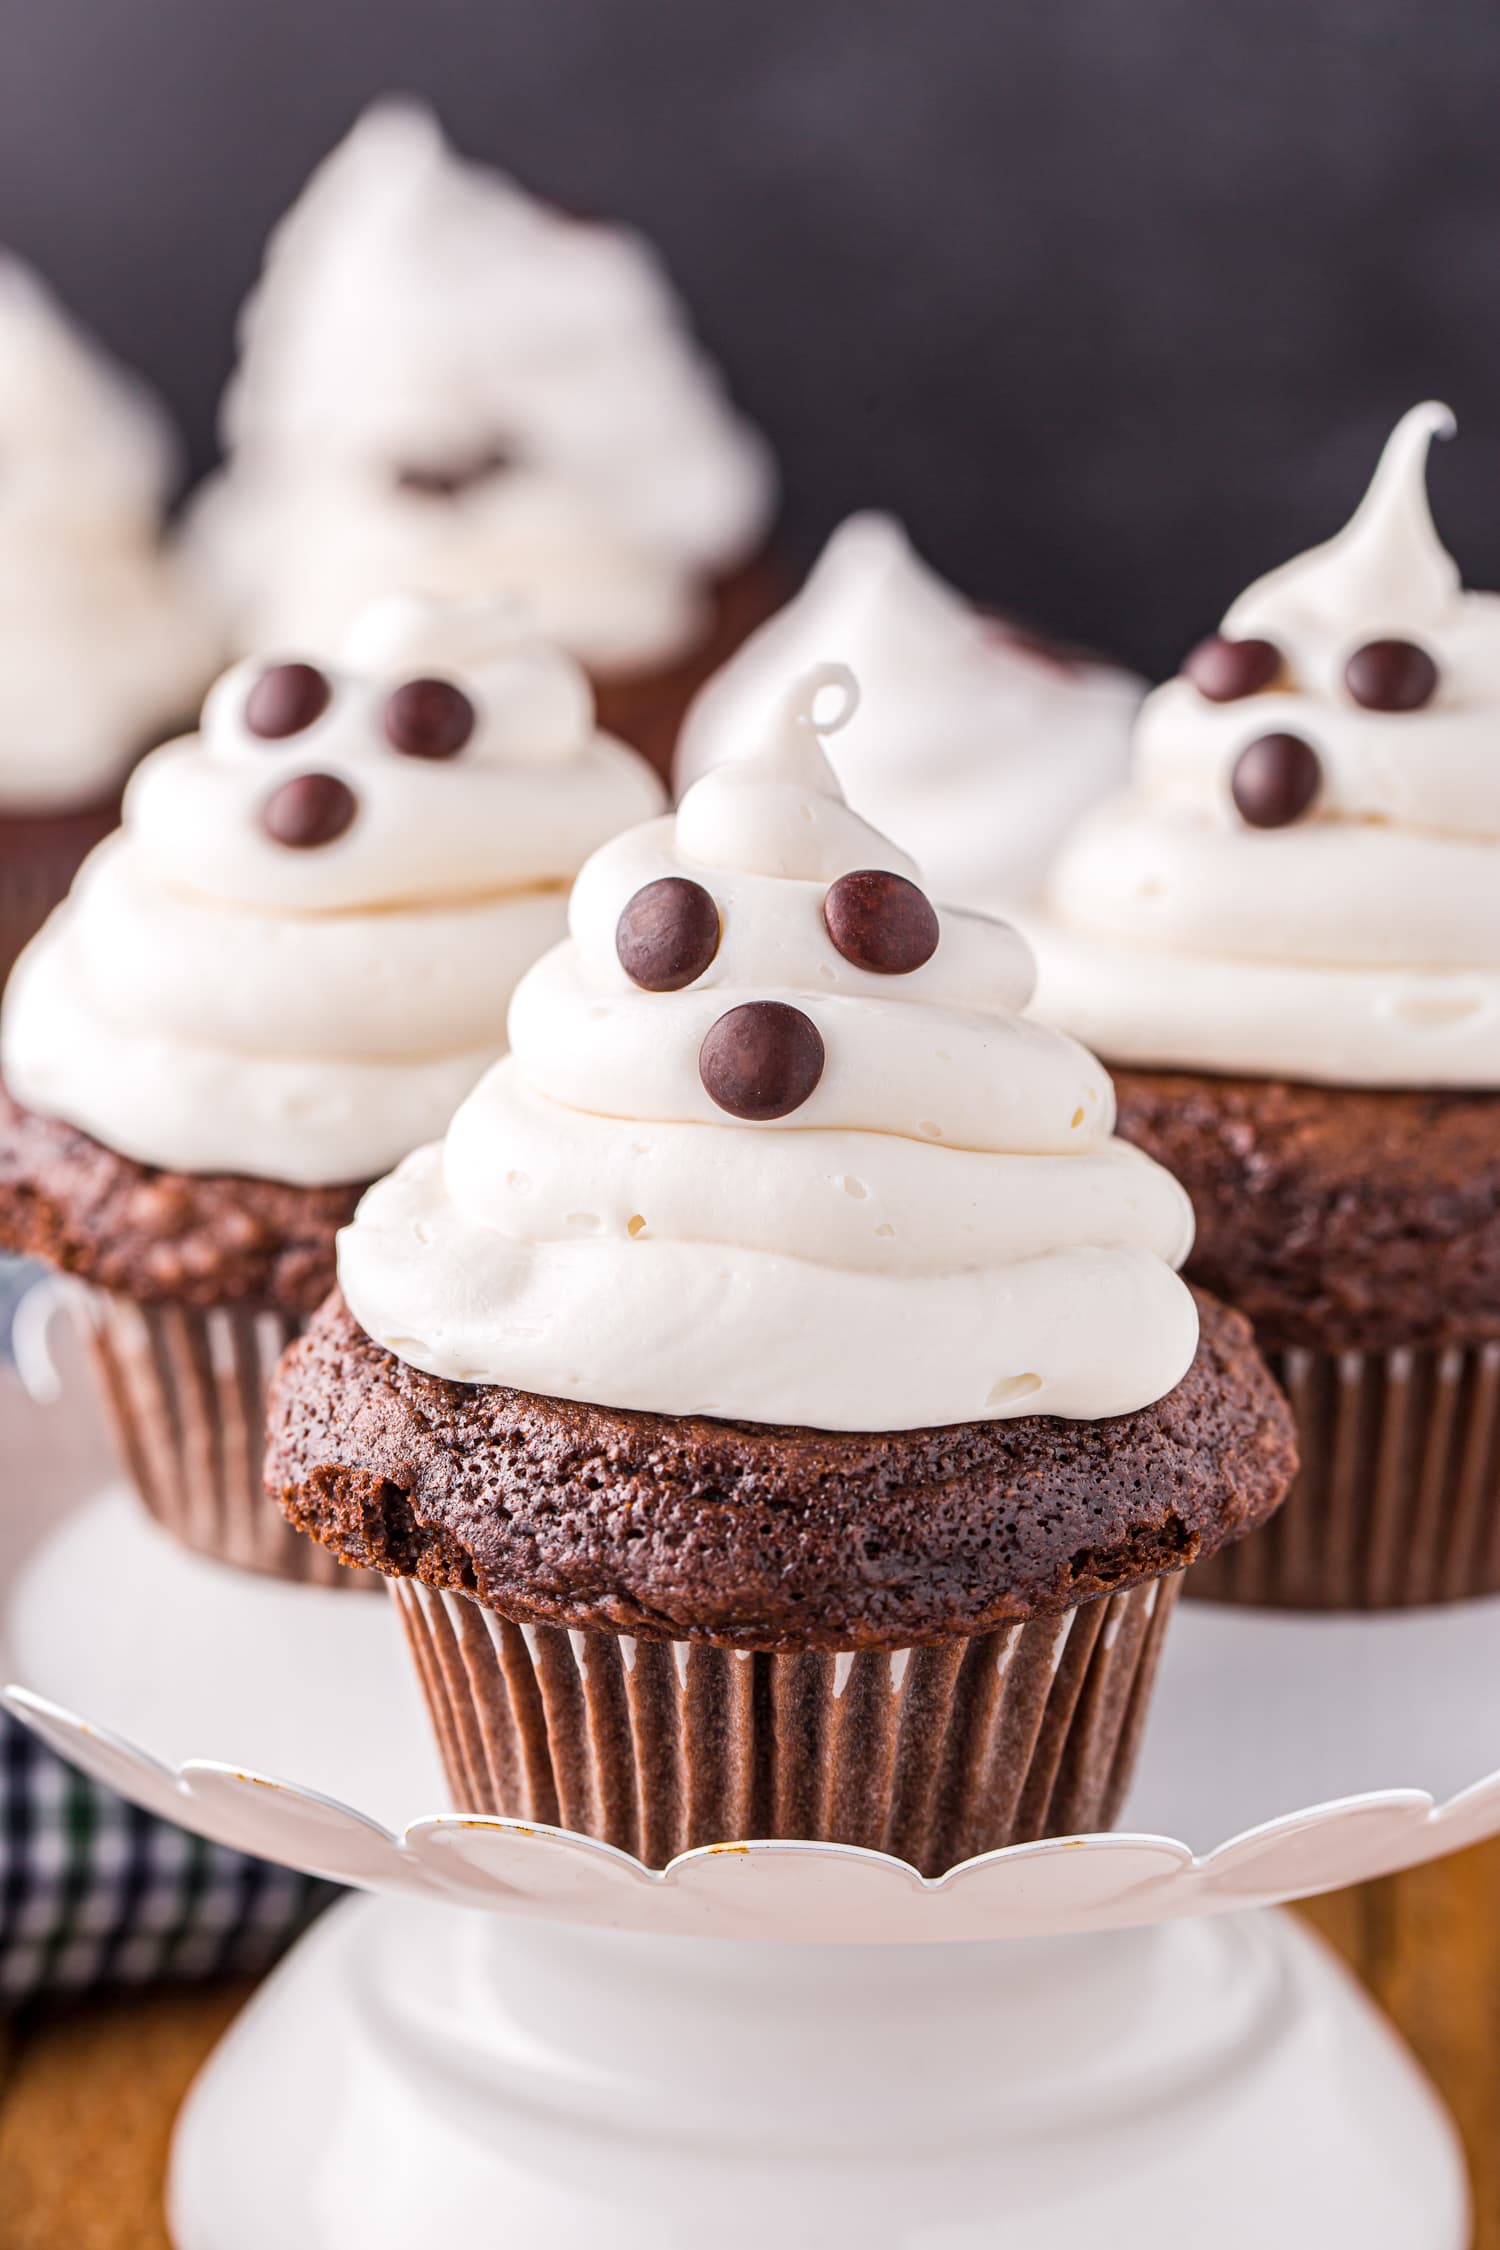 Ghost cupcakes on white cake platter